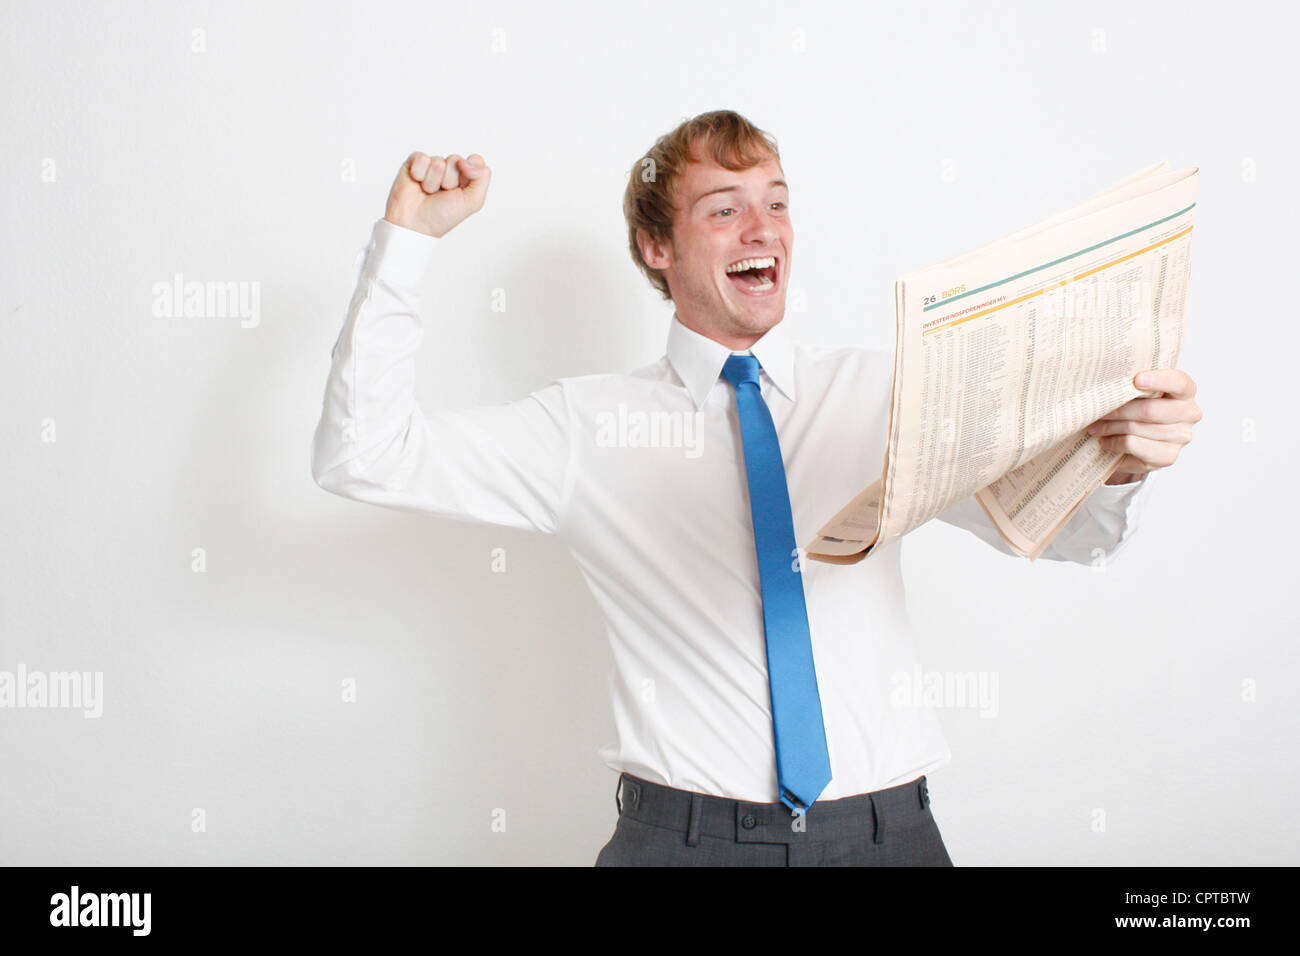 A very happy business man Stock Photo